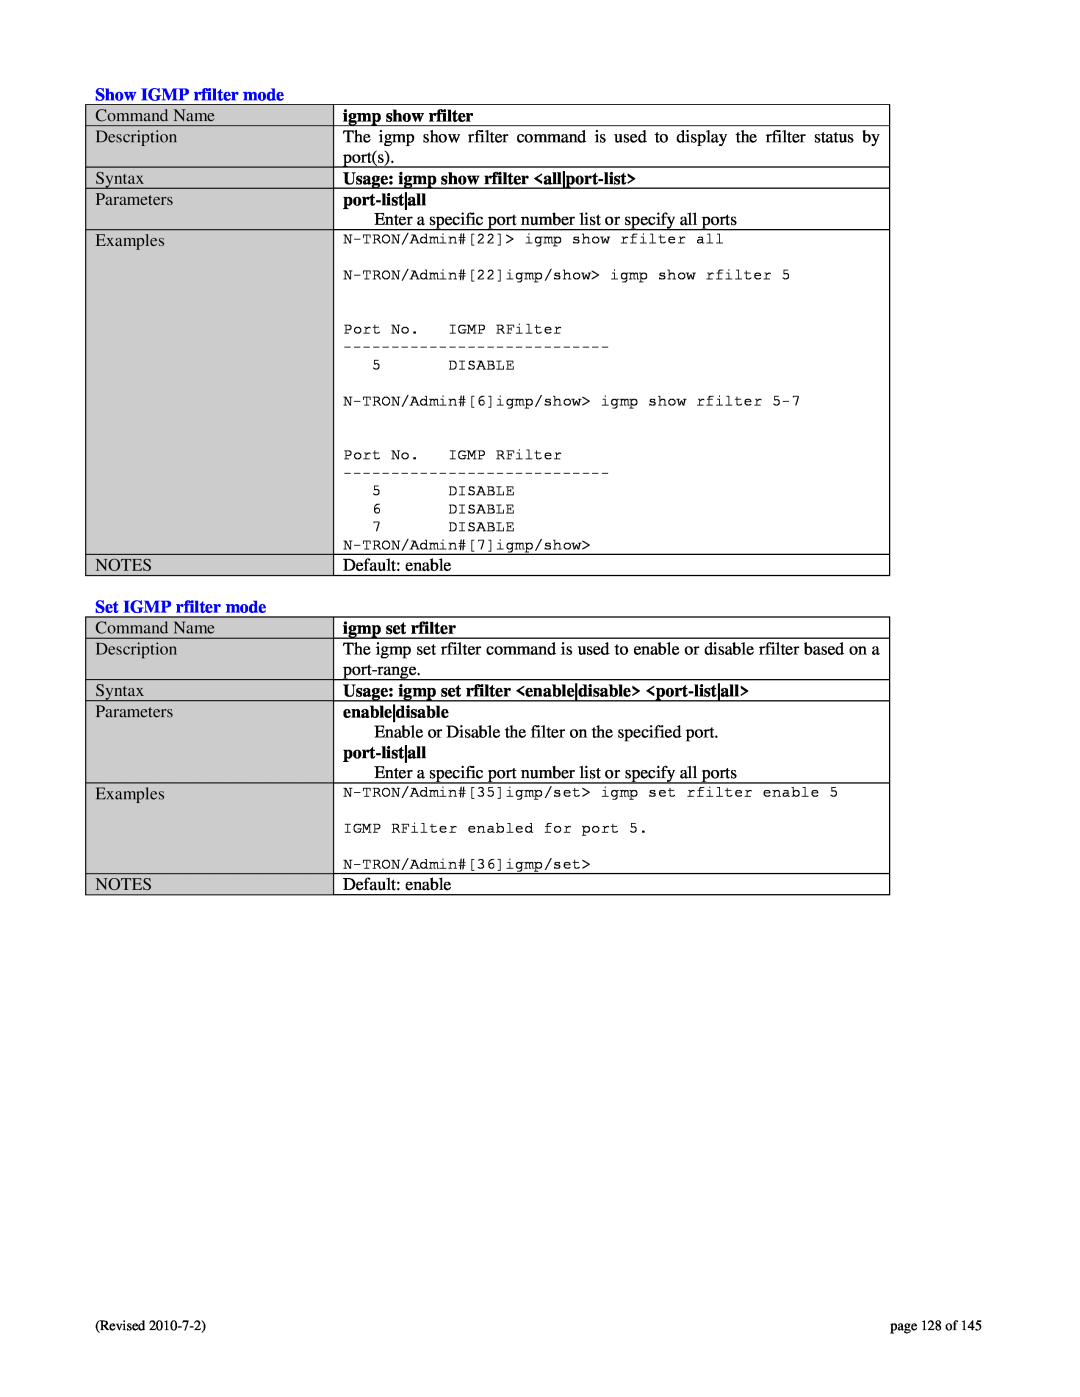 N-Tron 9000 user manual Show IGMP rfilter mode, Set IGMP rfilter mode, page 128 of 